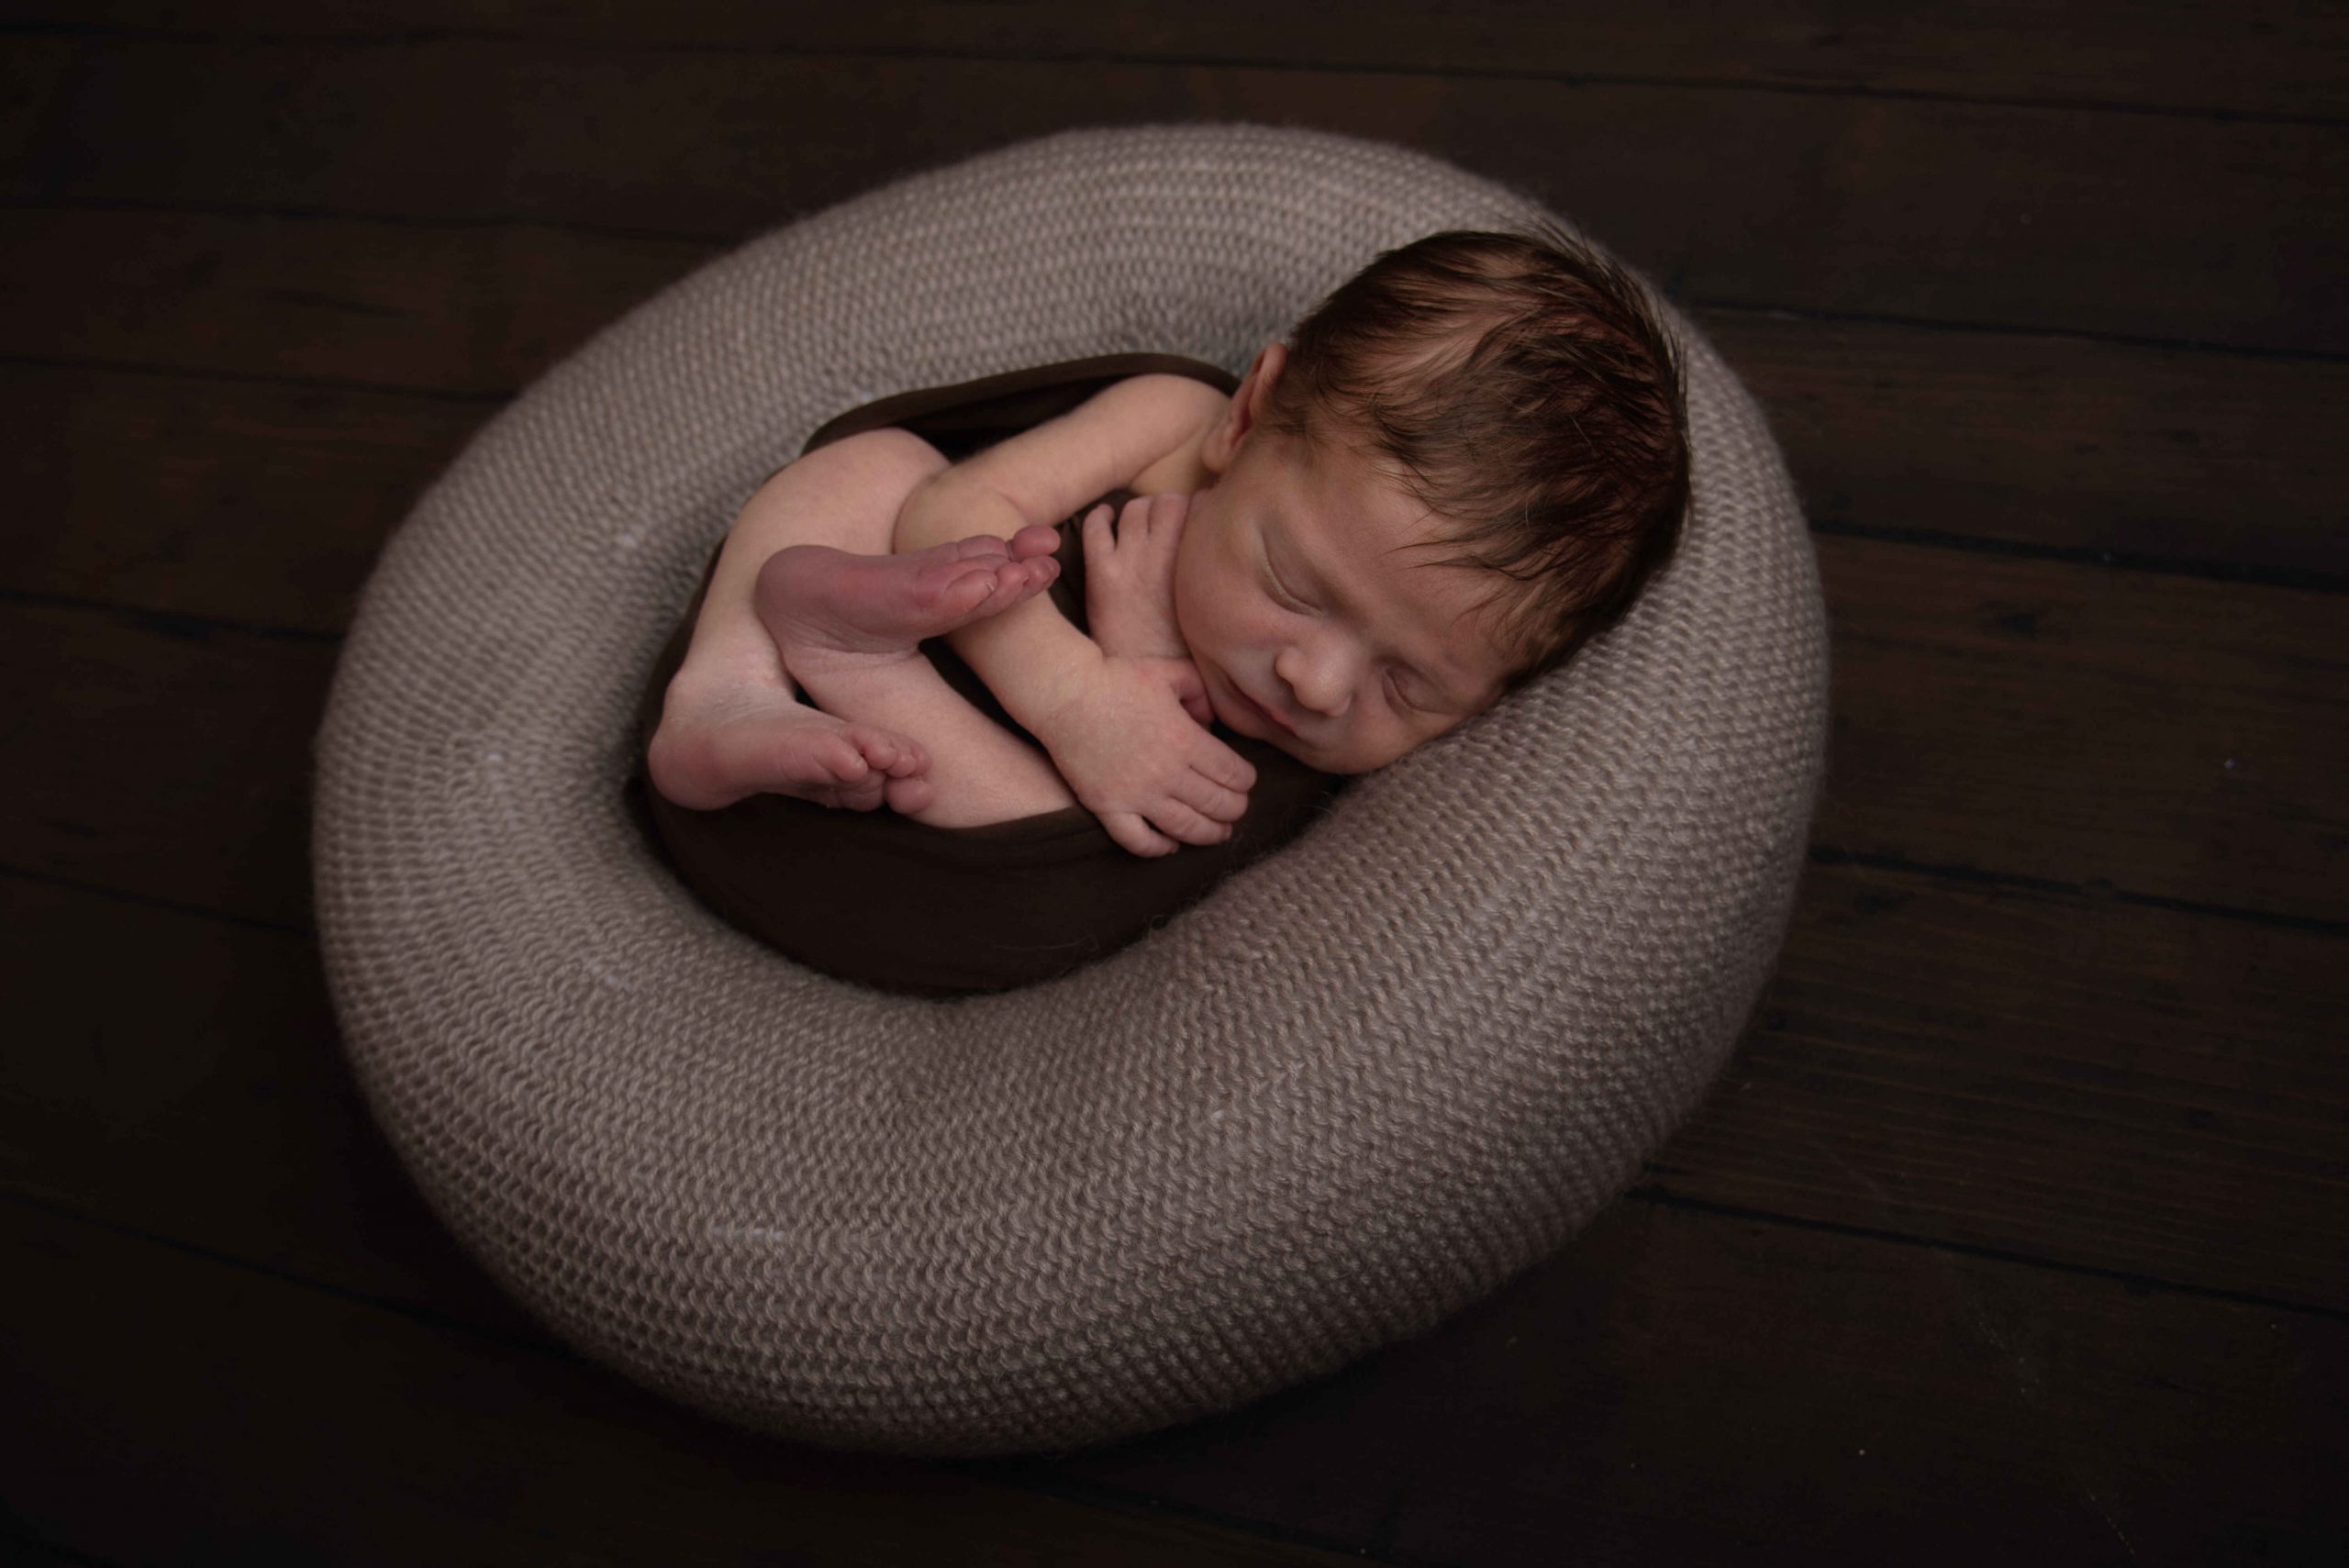 newborn baby boy, wrapped in brown